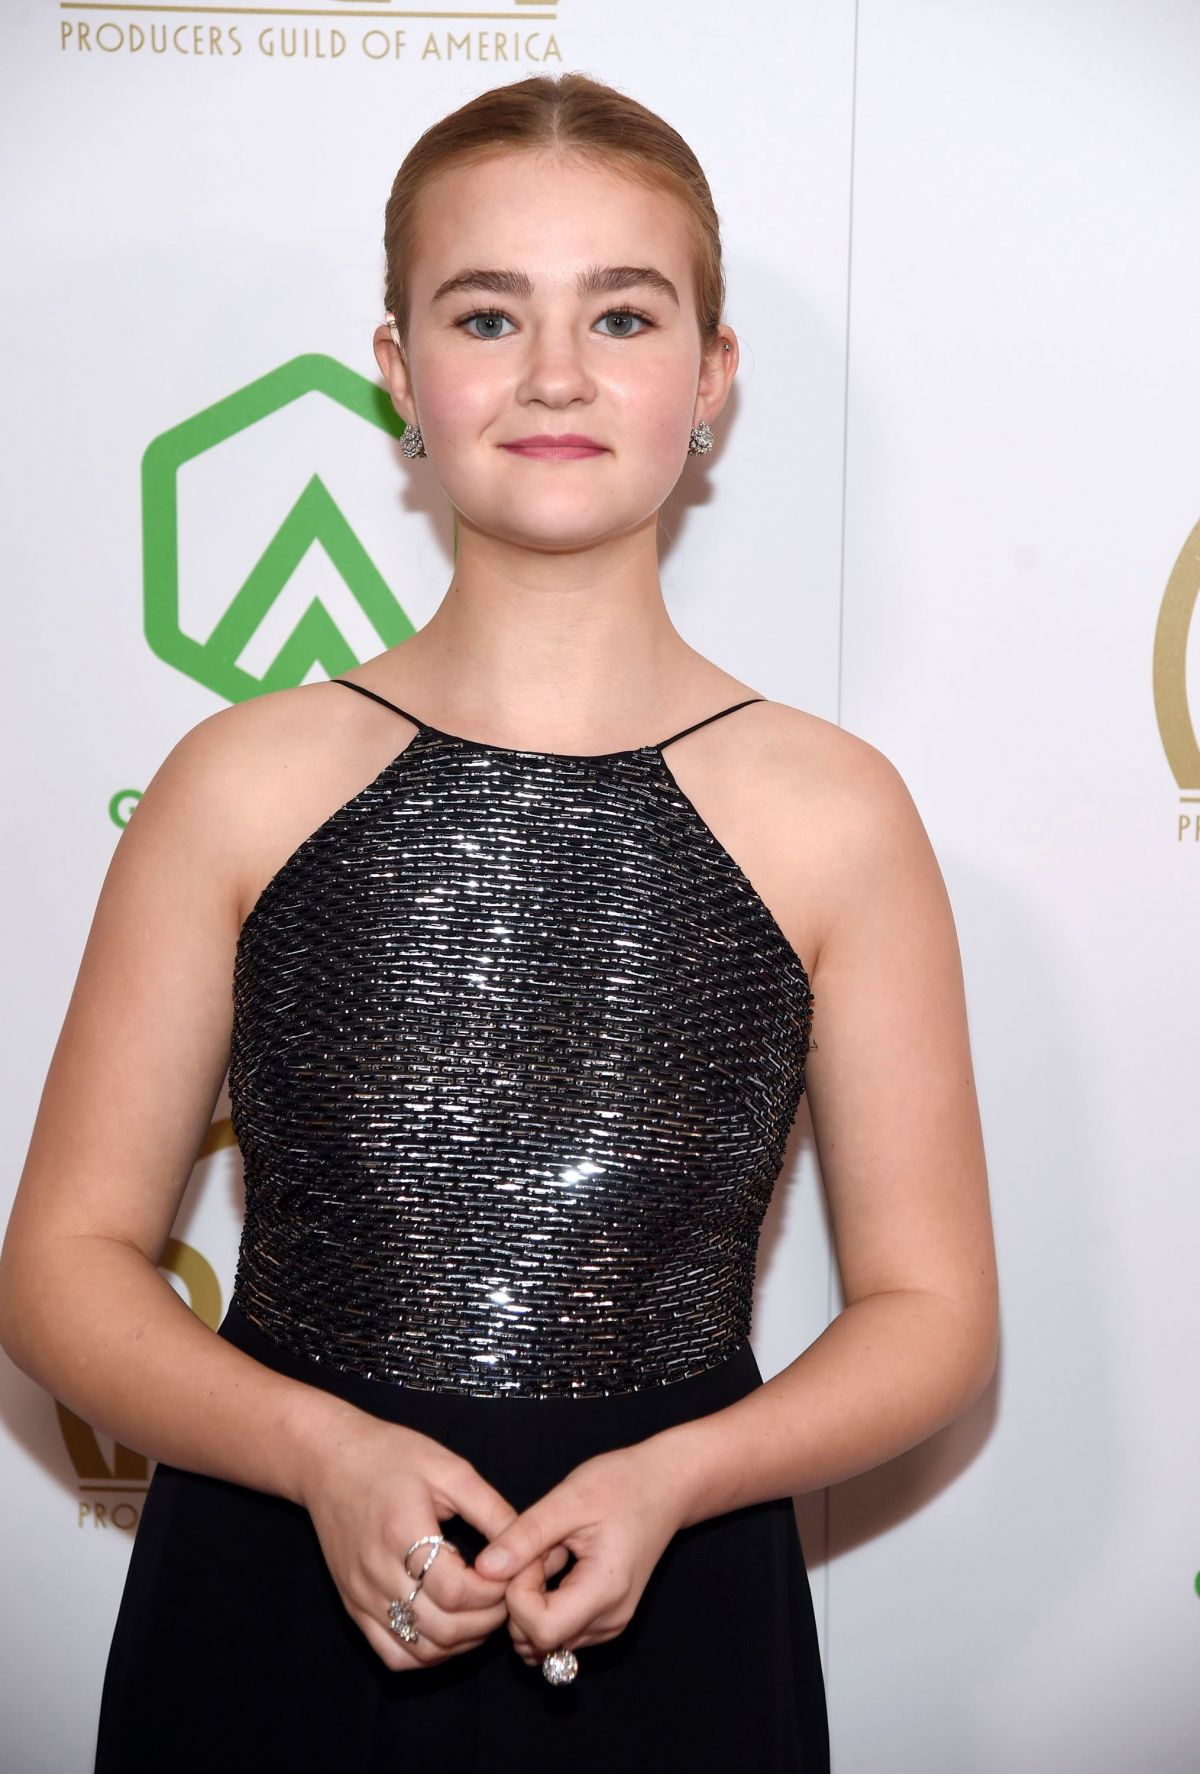 MILLICENT SIMMONDS at 2019 Producers Guild Awards in Beverly Hills 01/19/20...